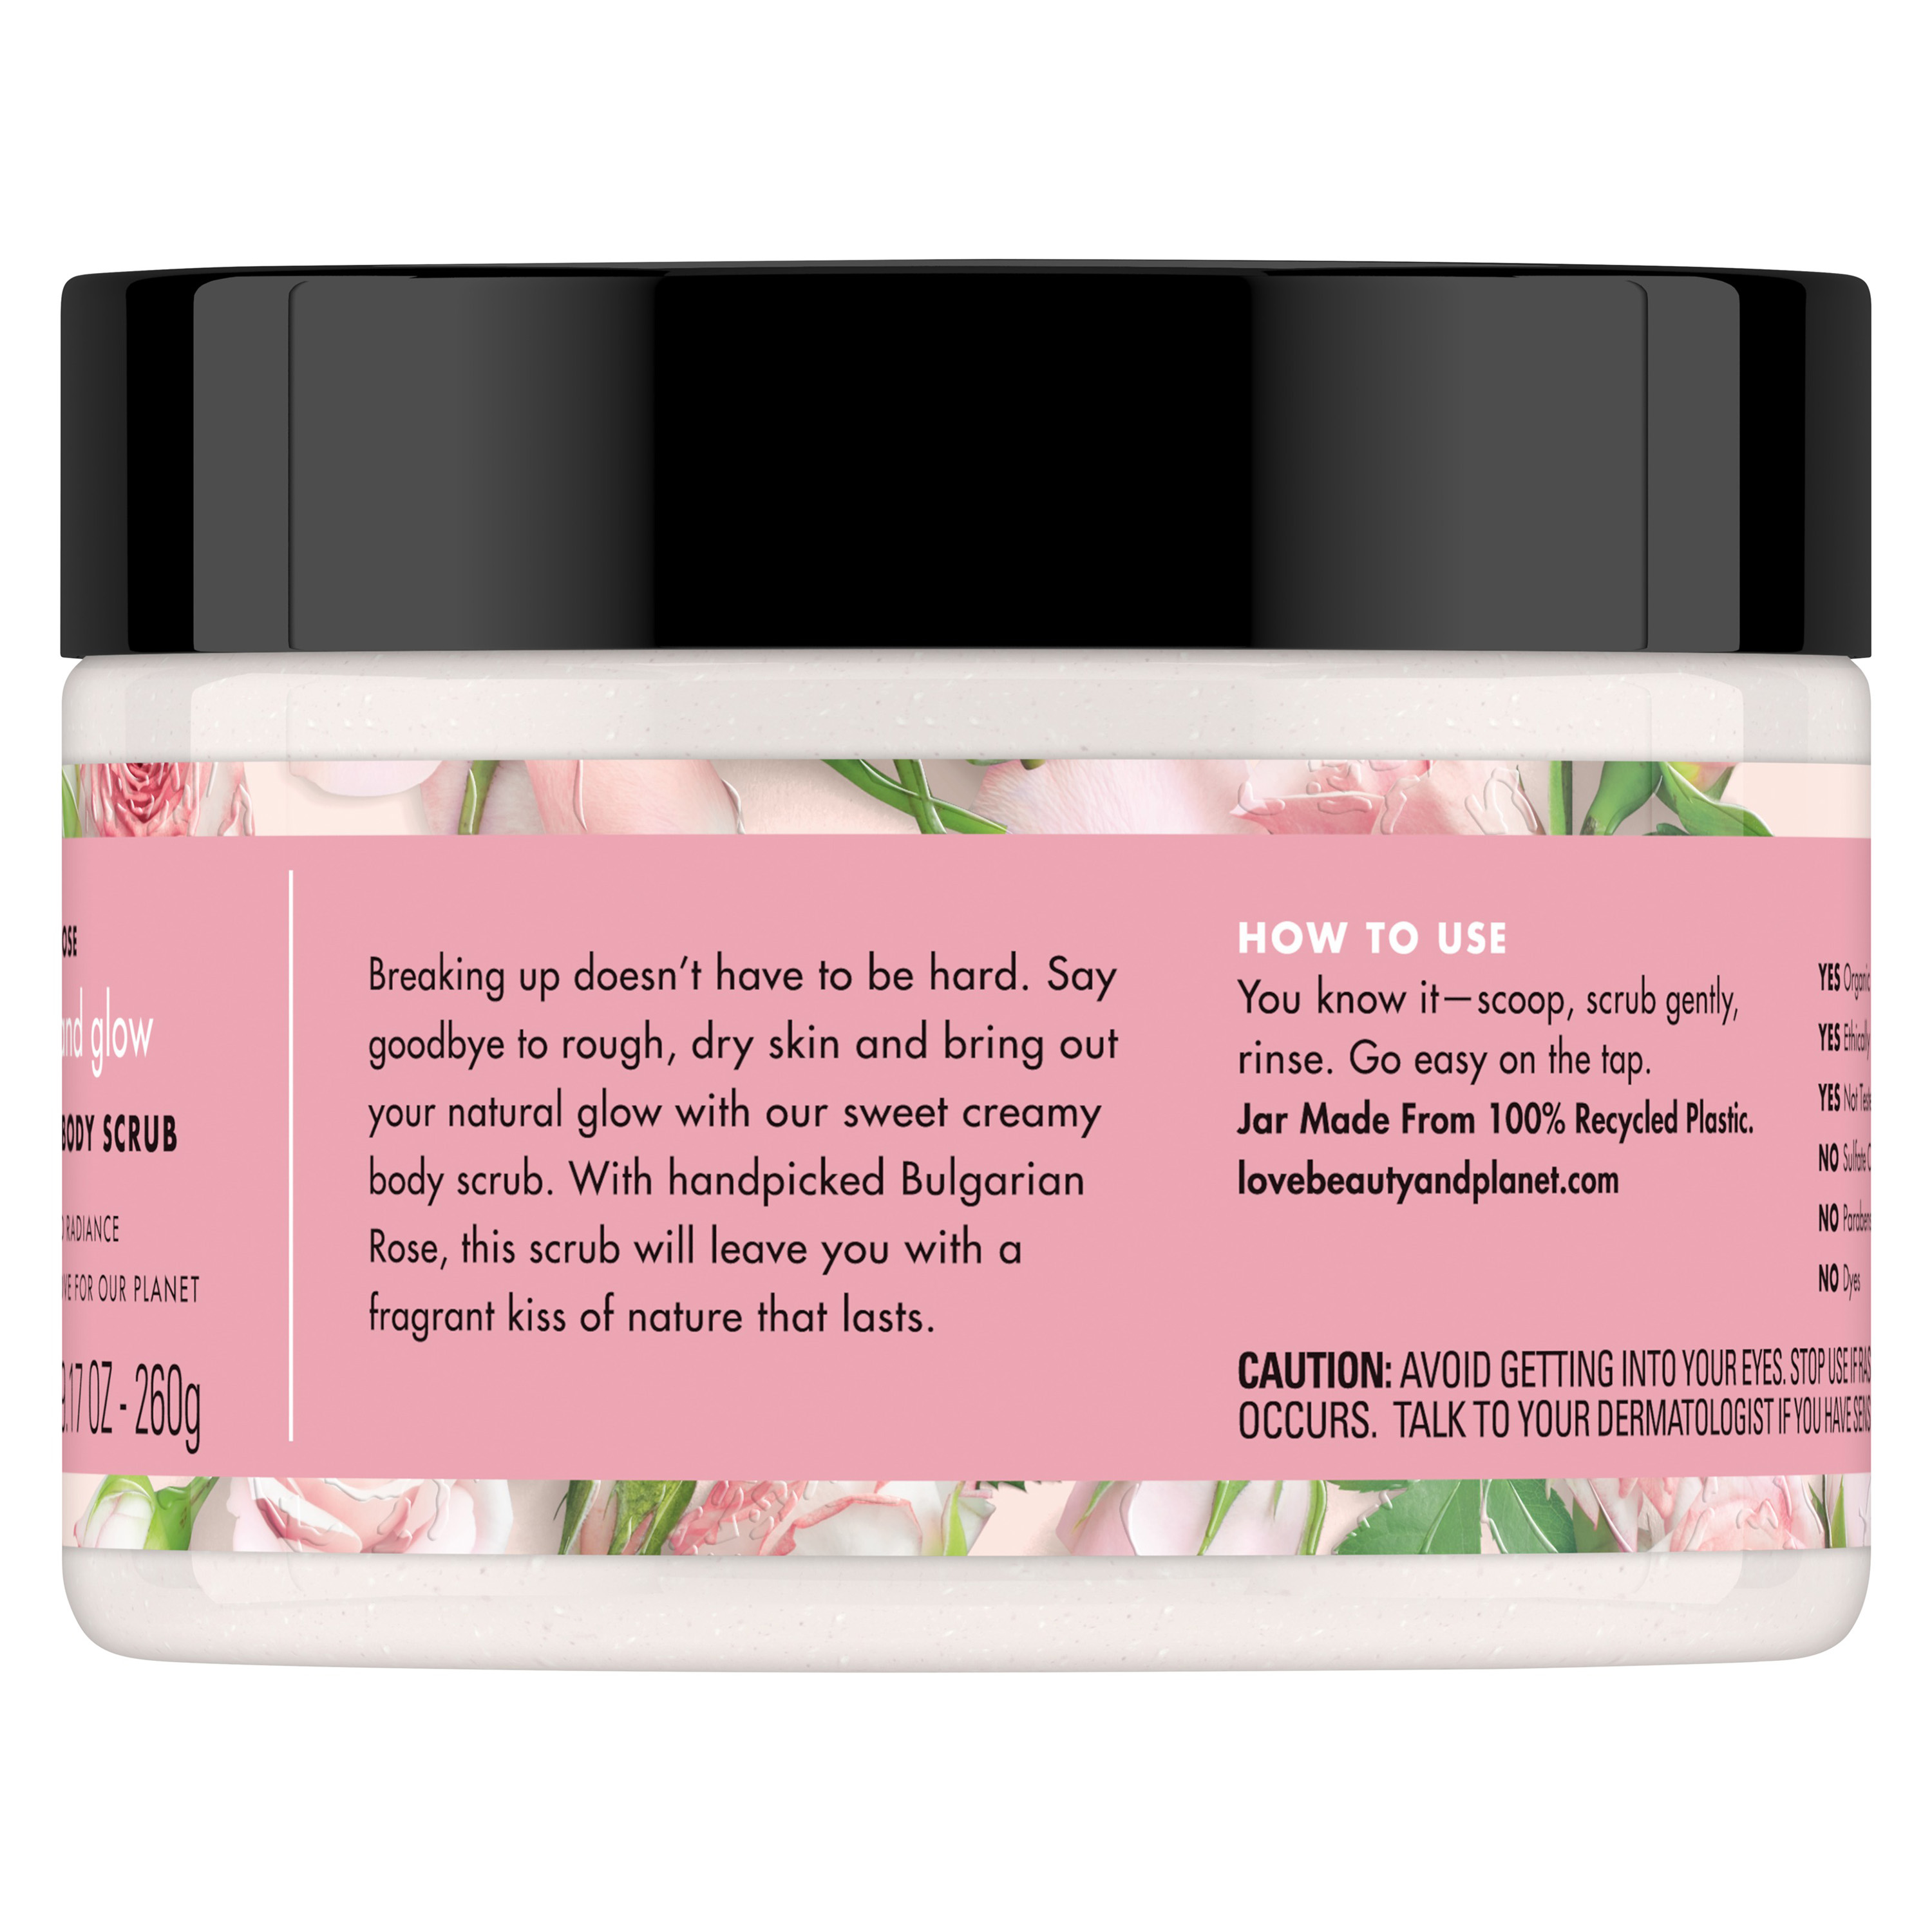 Love Beauty And Planet Sugar & Rose Scrub Creamy Exfoliating Body Scrub Peace and Glow 9.17 oz - image 10 of 13